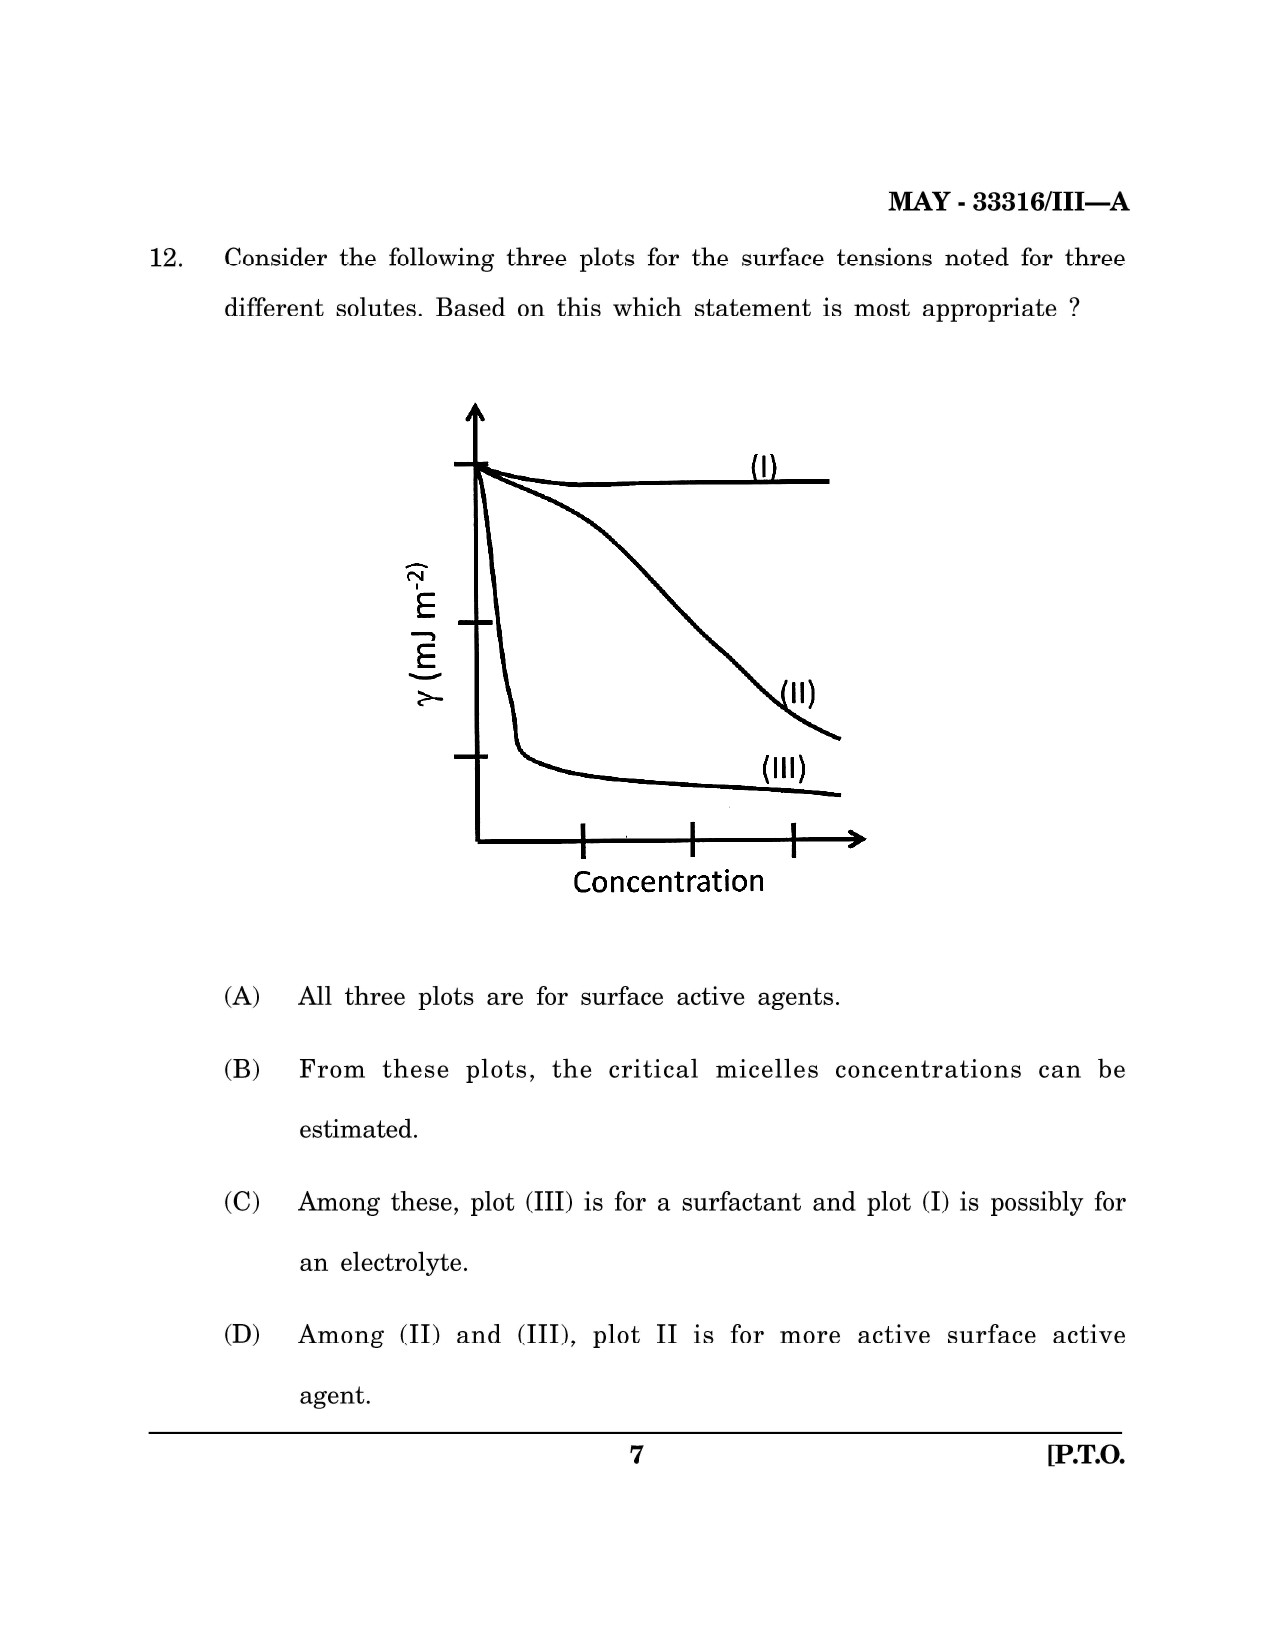 Maharashtra SET Chemical Sciences Question Paper III May 2016 6